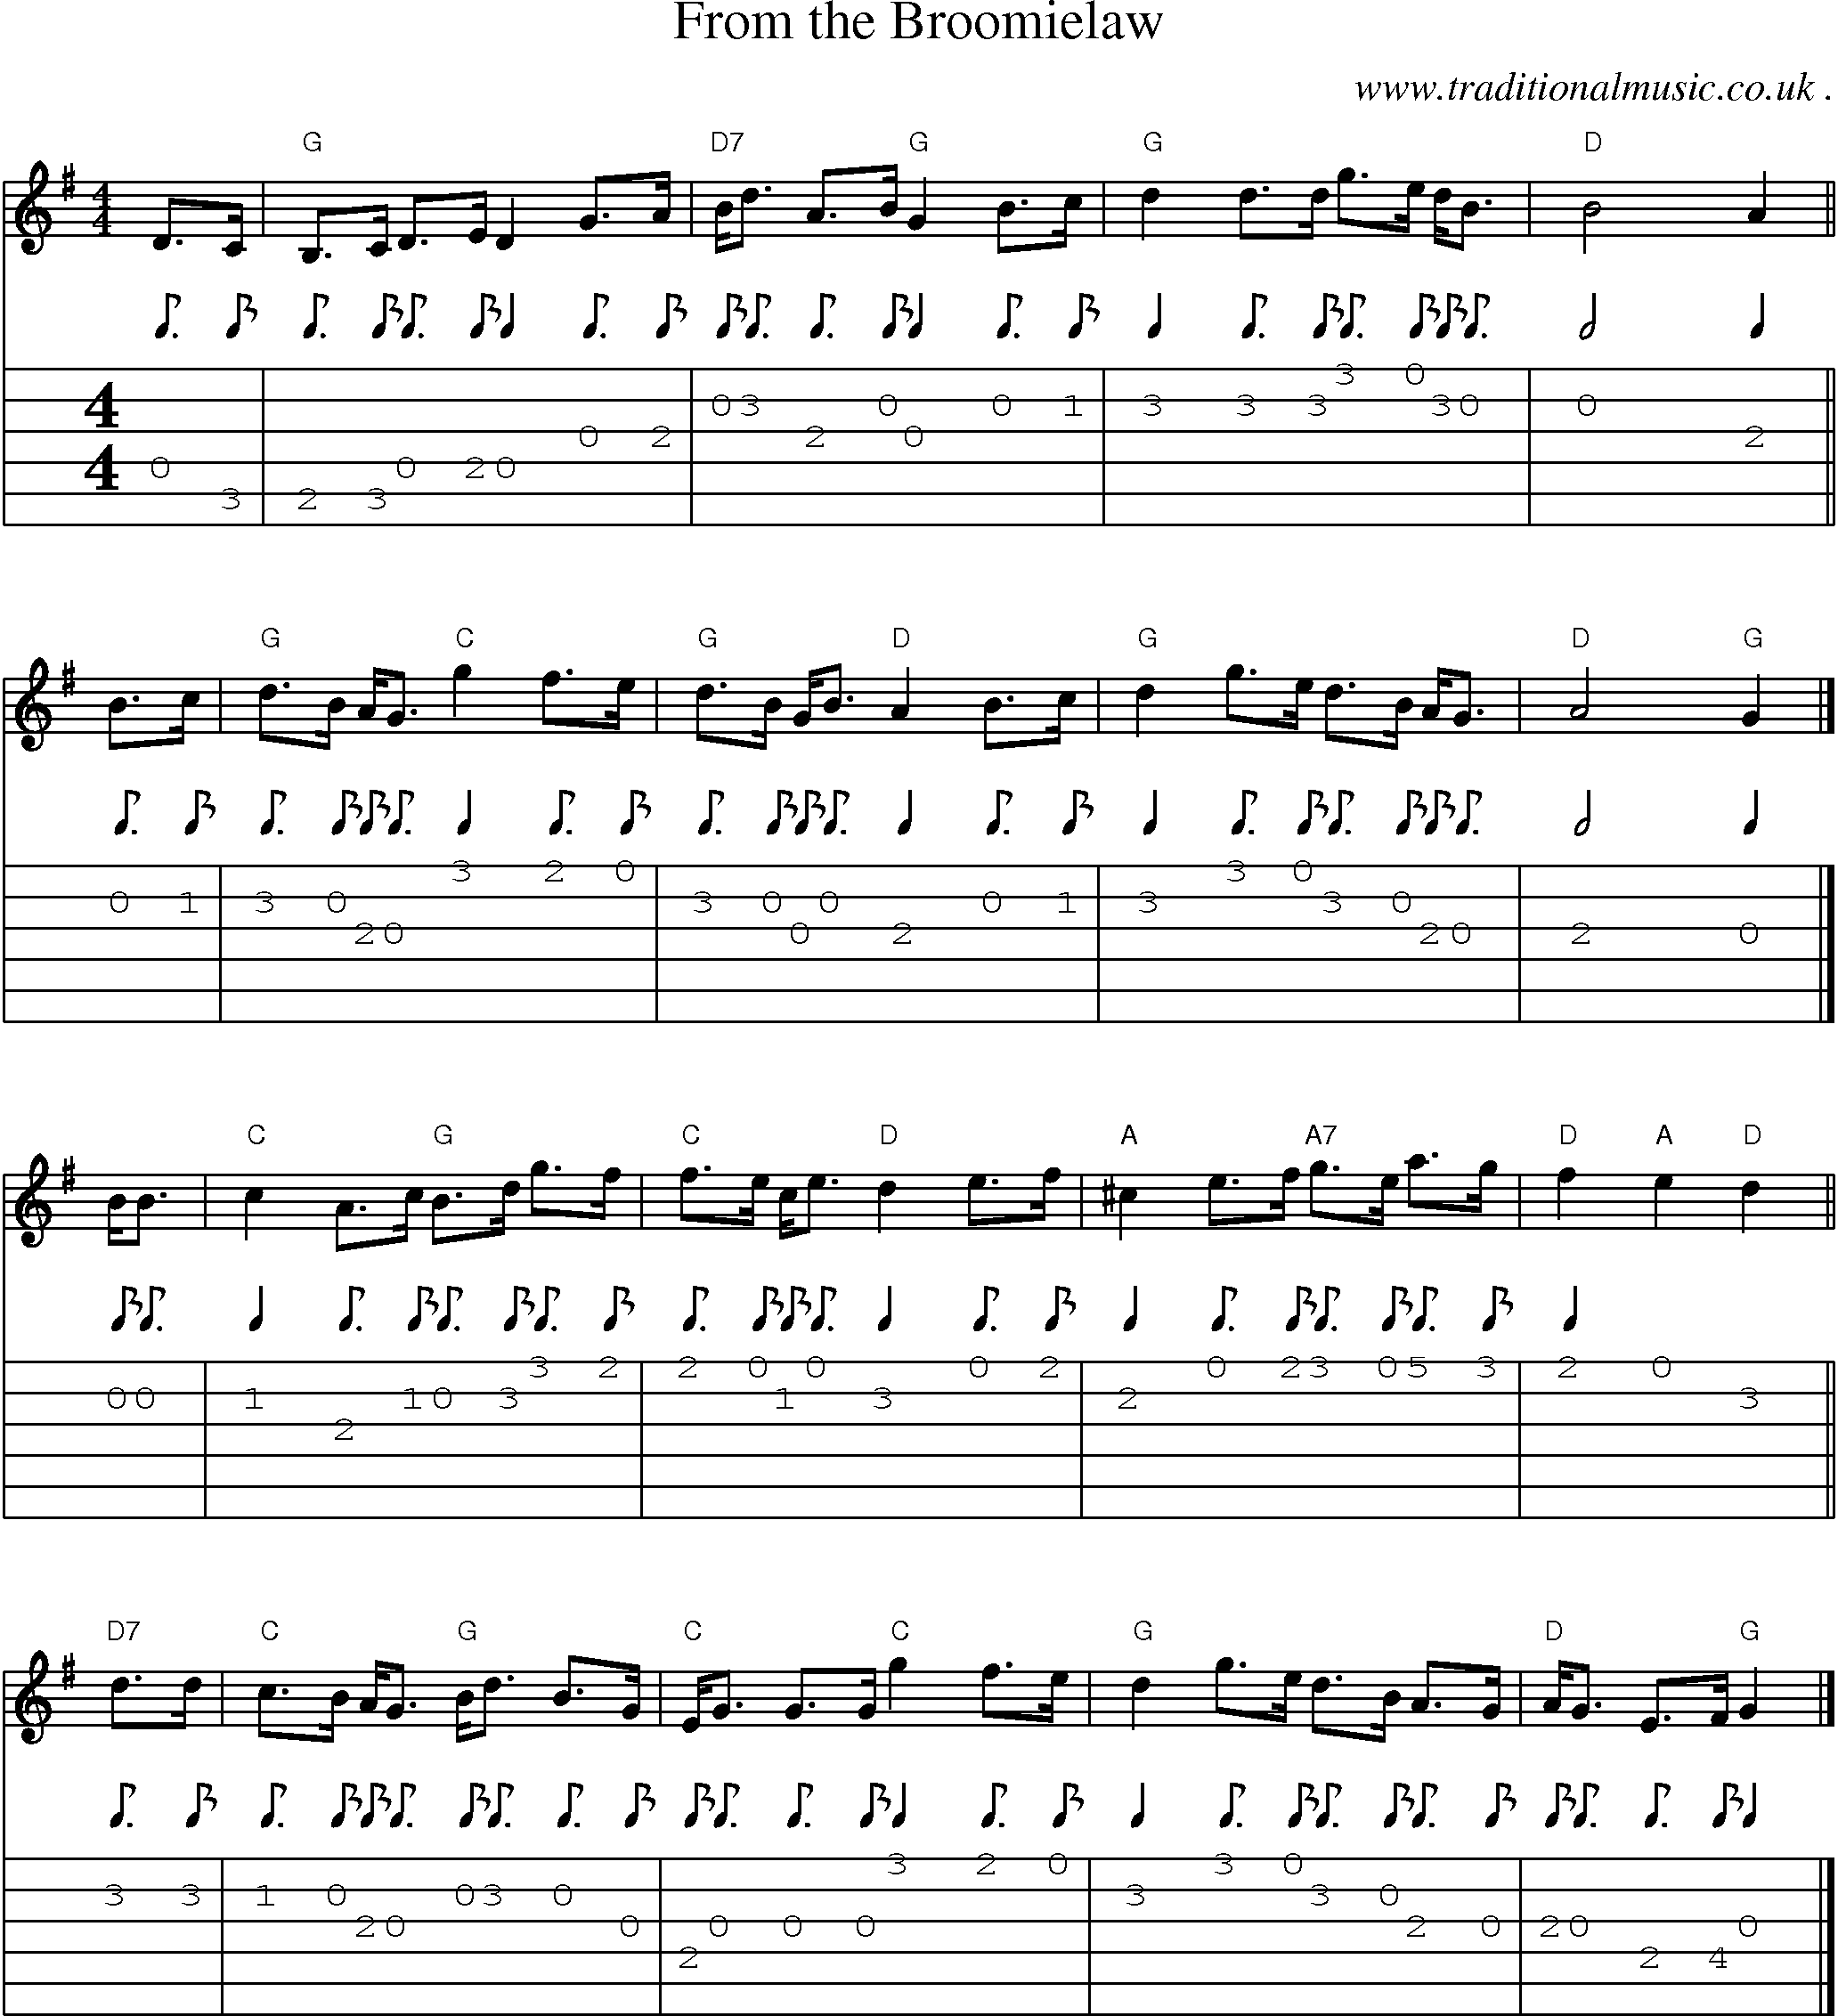 Sheet-music  score, Chords and Guitar Tabs for From The Broomielaw